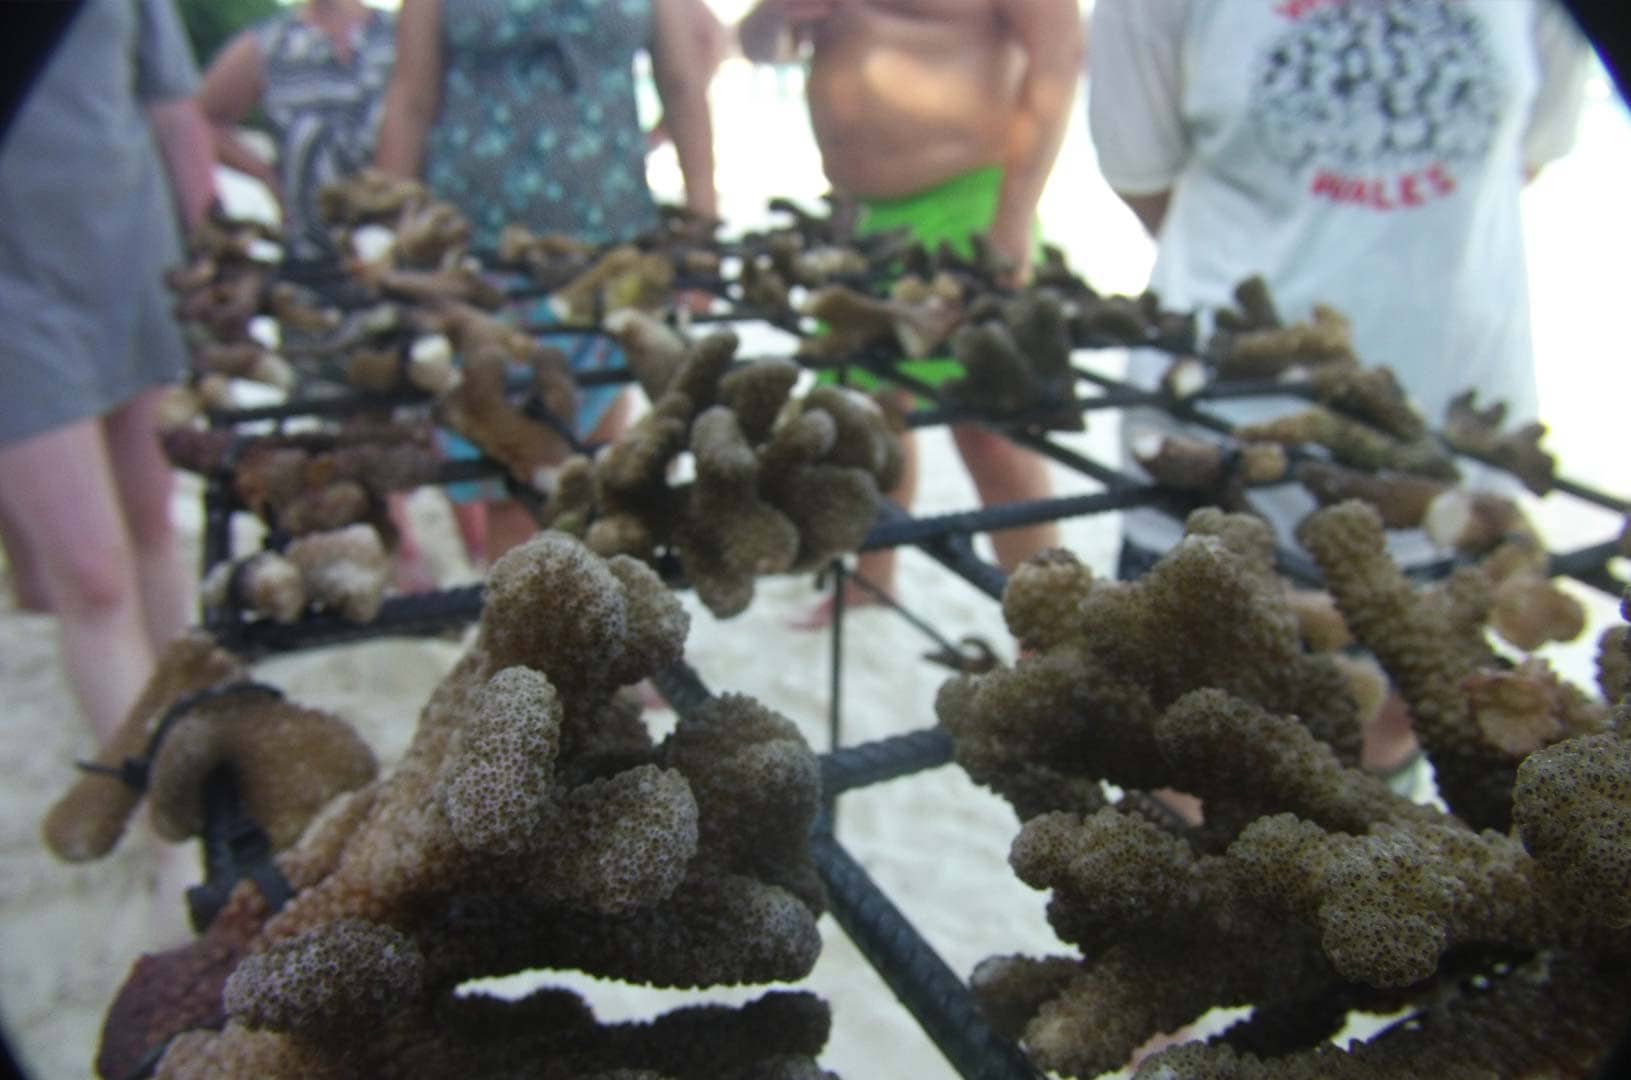 Coral planting in the Maldives